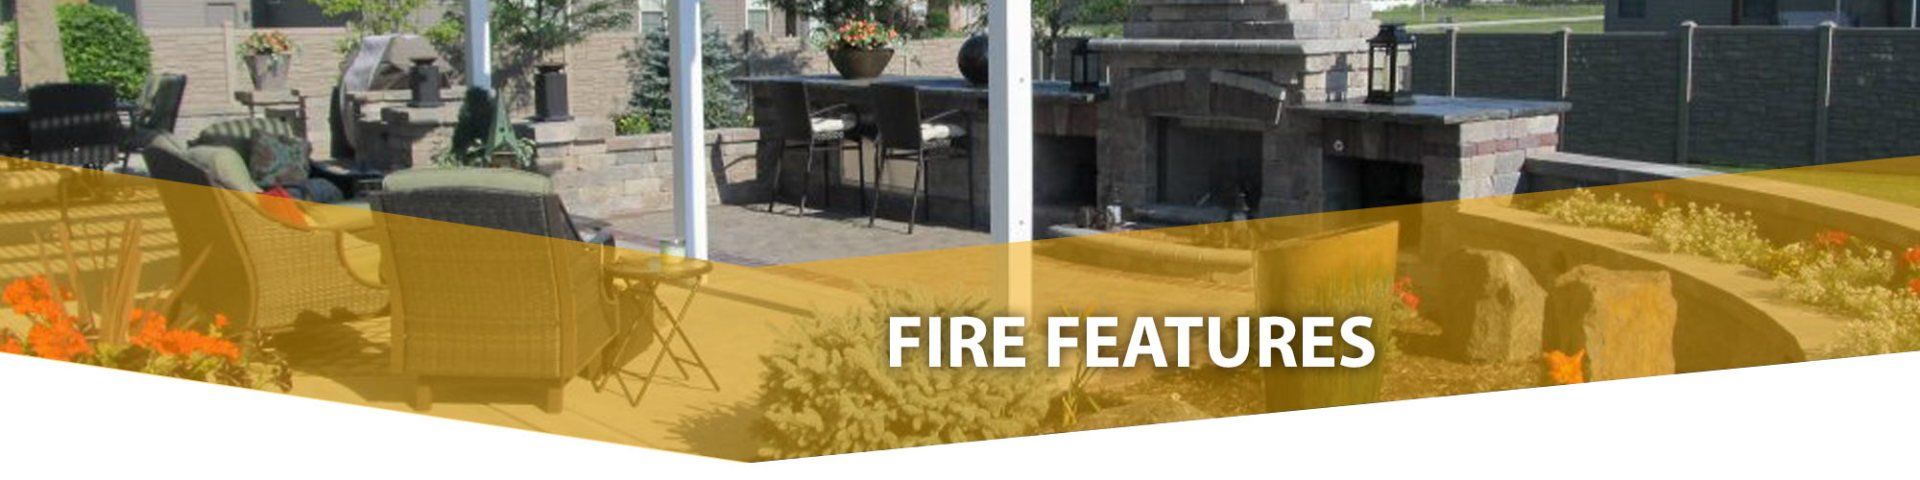 Fire Pits and Outdoor Fireplaces - Bloomington IL